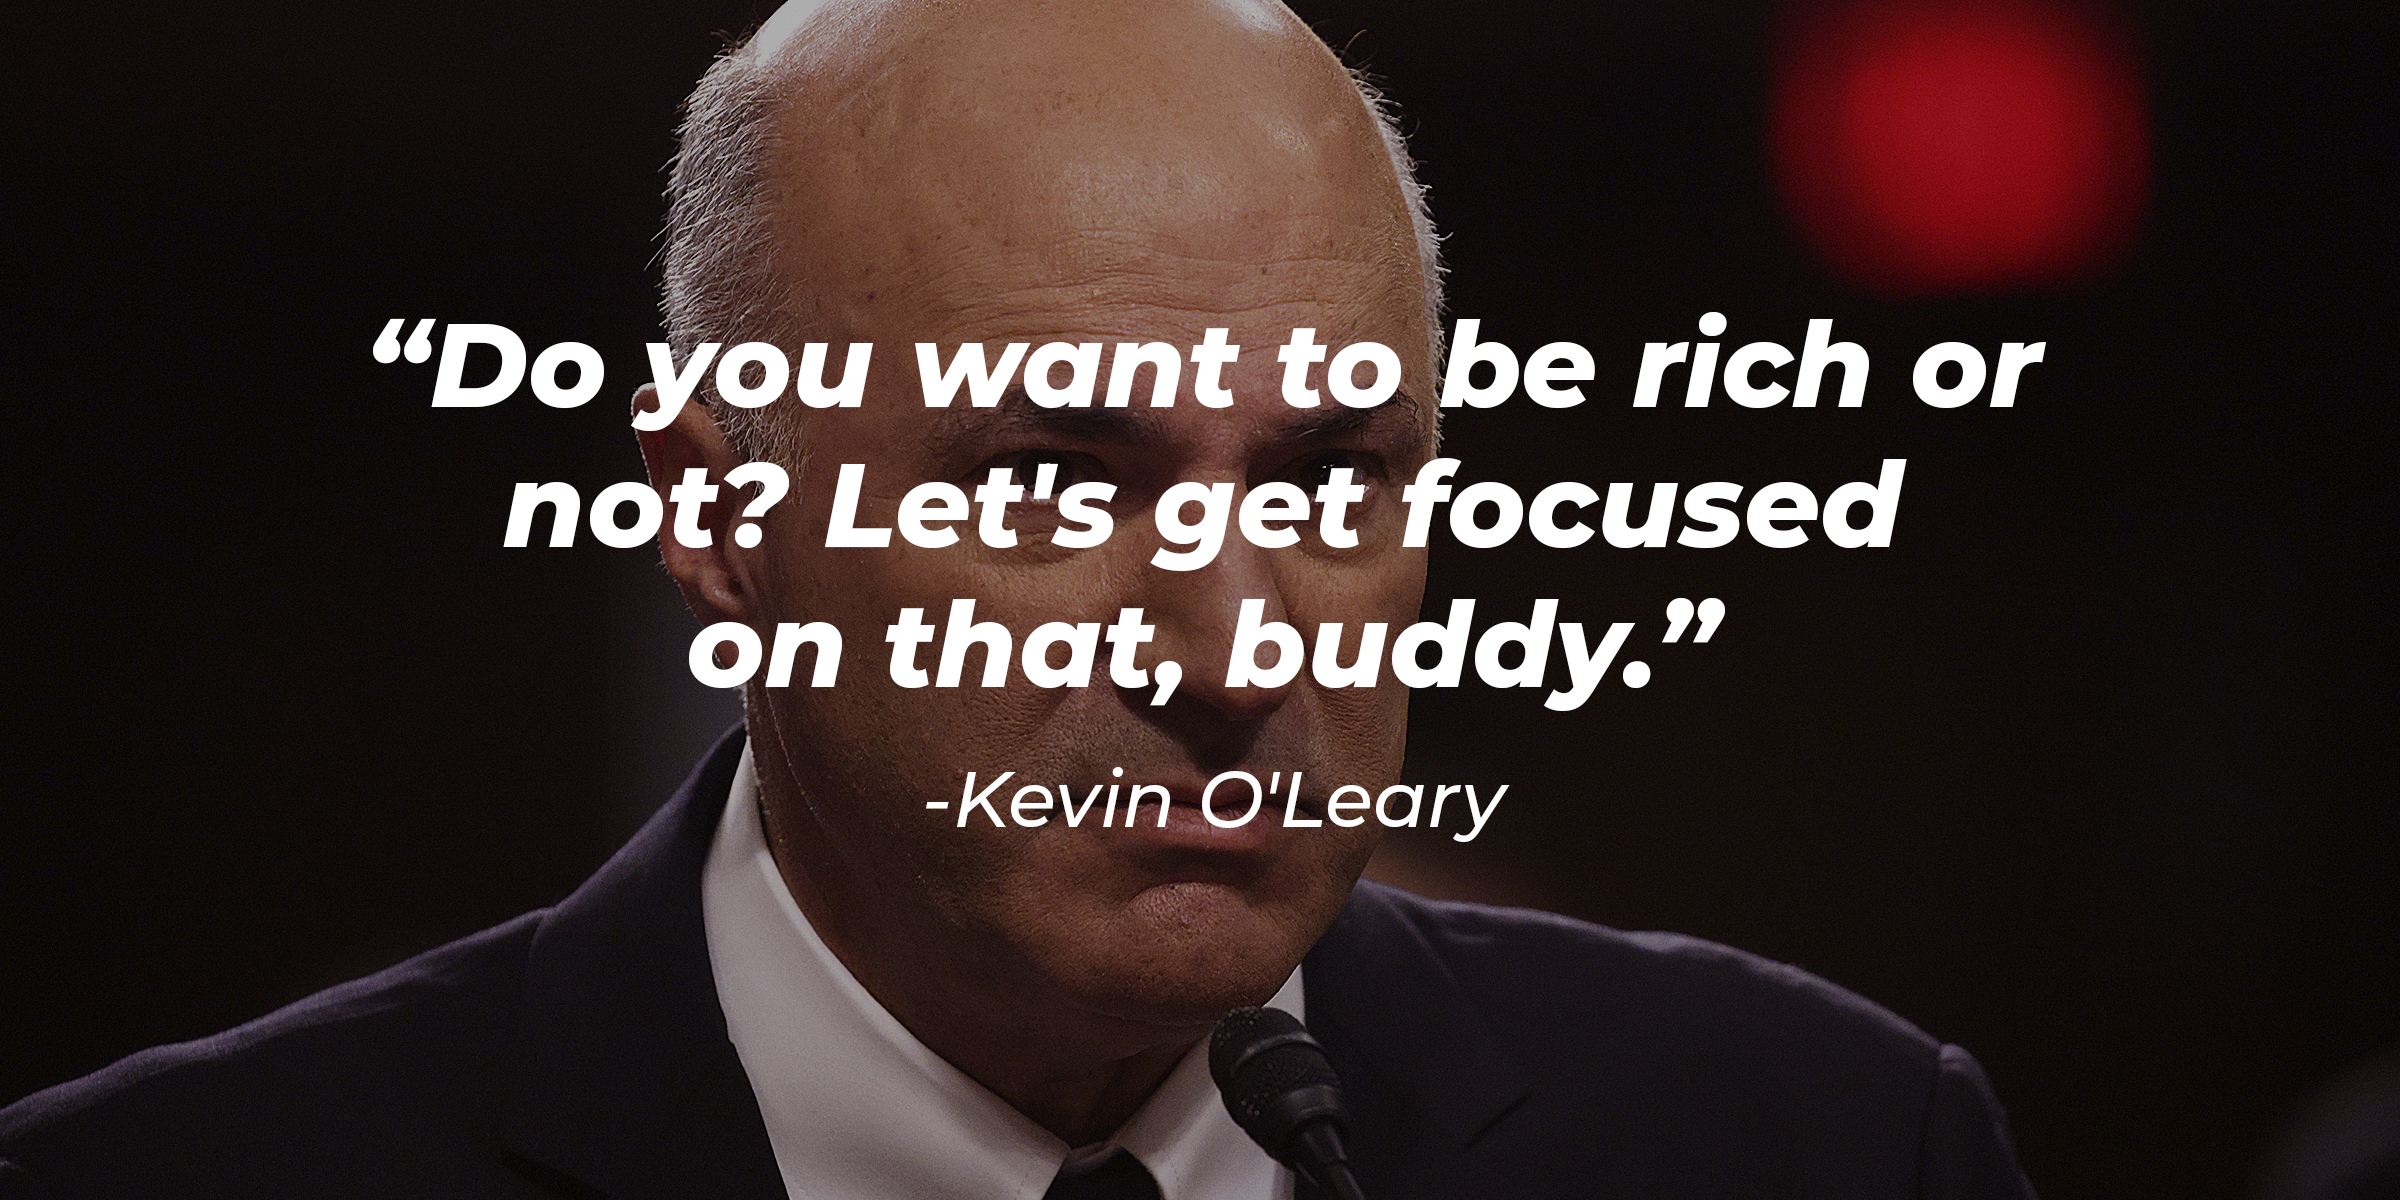 Kevin O'Leary with His Quote, "Do You Want to Be Rich or Not? Let's Get Focused on That, Buddy." | Source: Getty Images